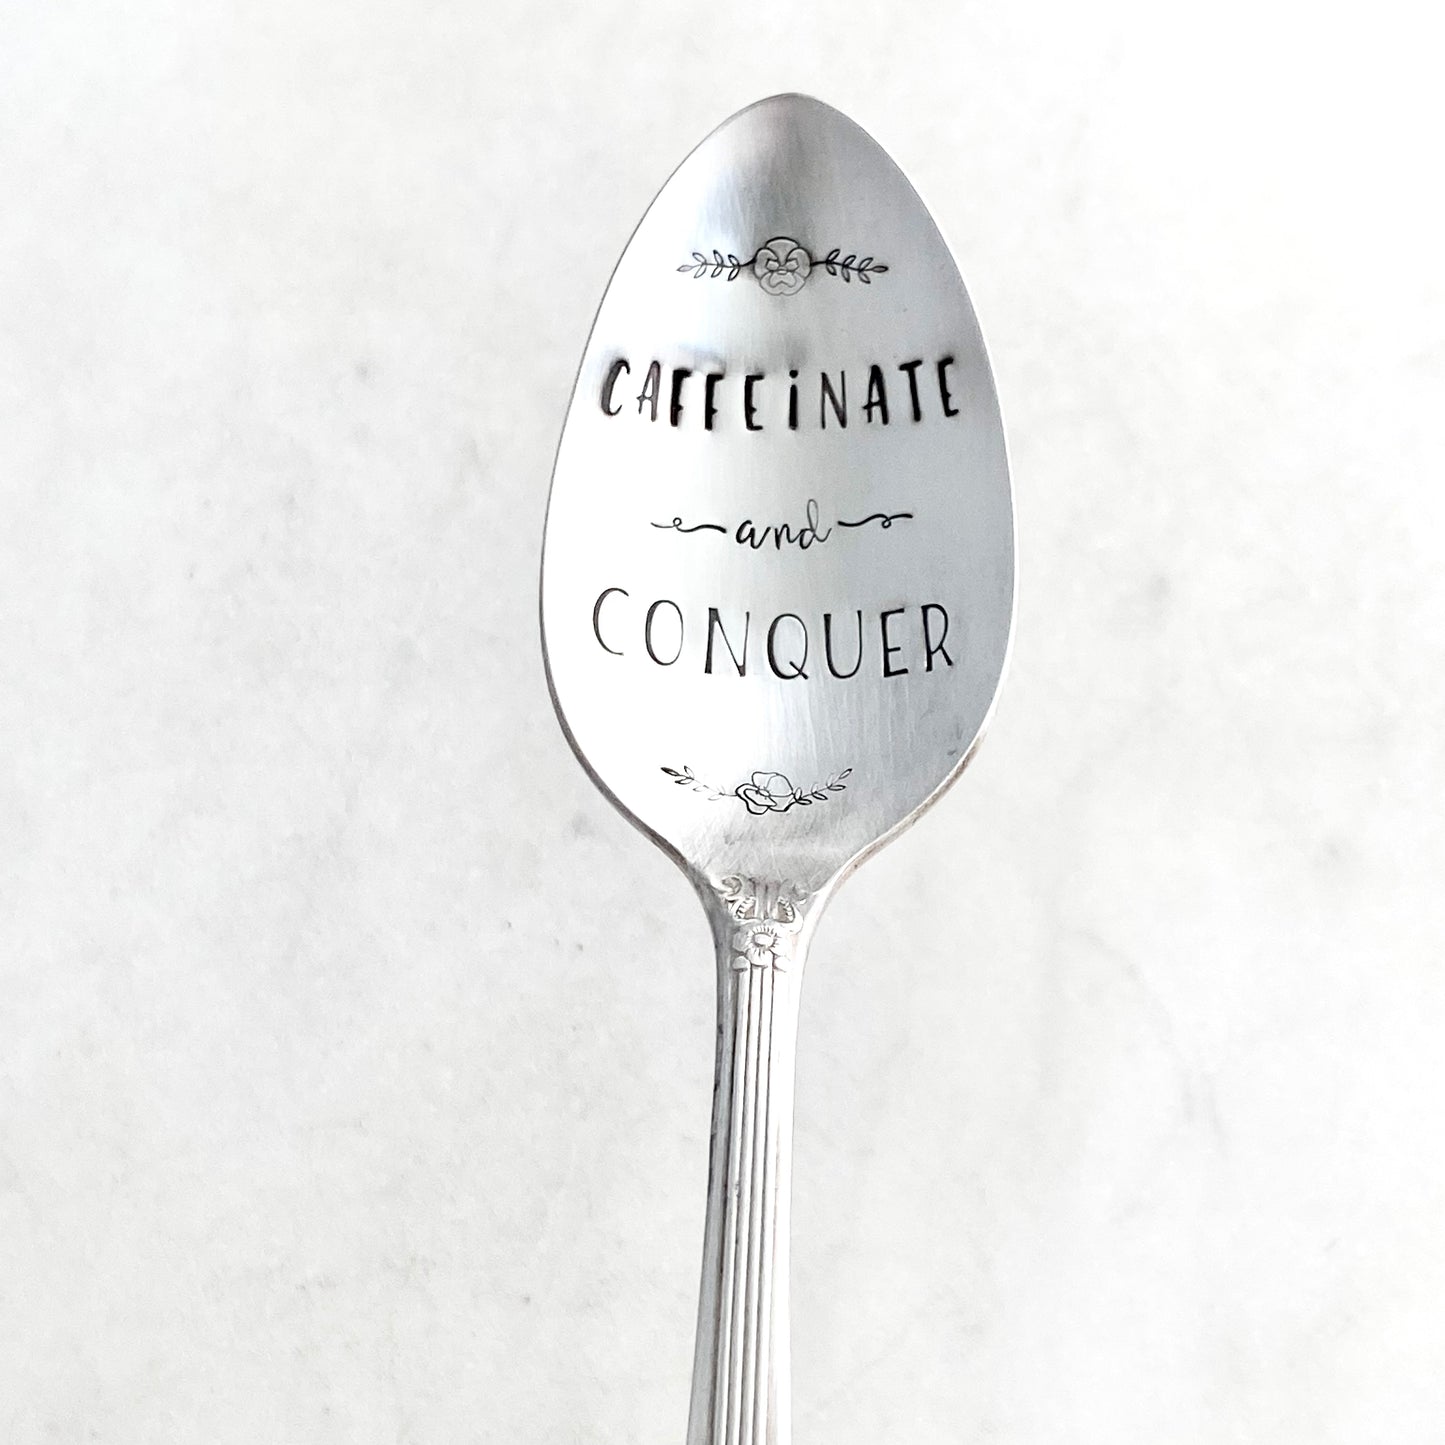 Caffeinate and Conquer, Hand Stamped Vintage Spoon Spoons callistafaye   